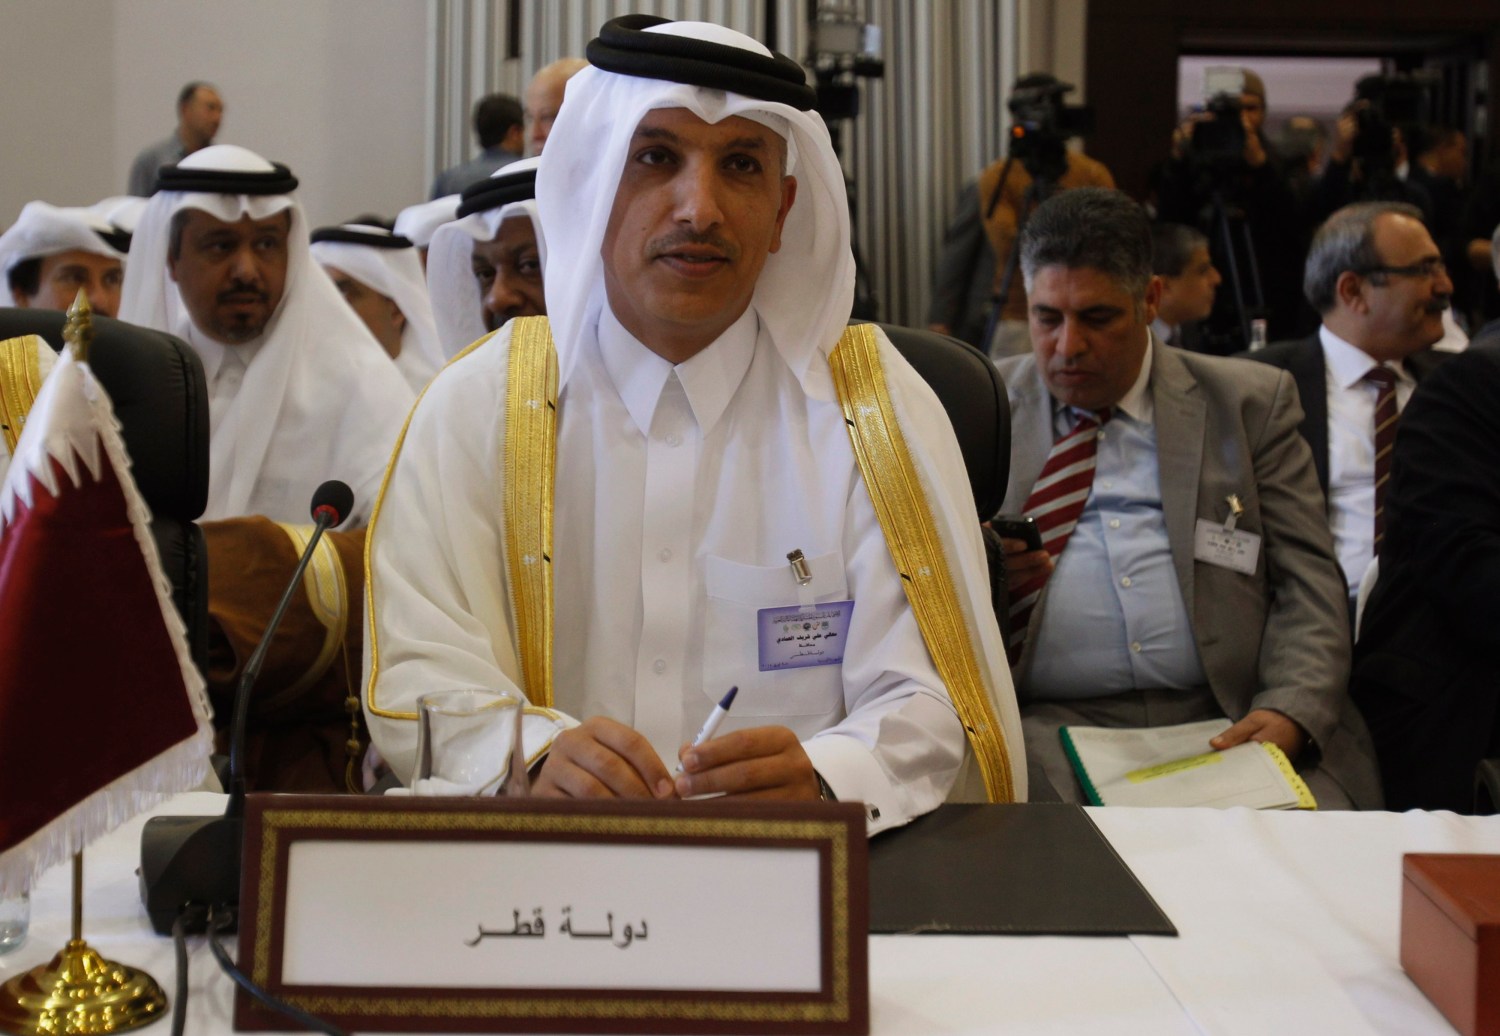 Qatar's Minister of Finance Ali Sharif Al Emadi attends the opening ceremony of a forum for Arab financial institutions in Tunis April 8, 2014. REUTERS/Zoubeir Souissi (TUNISIA - Tags: POLITICS BUSINESS)